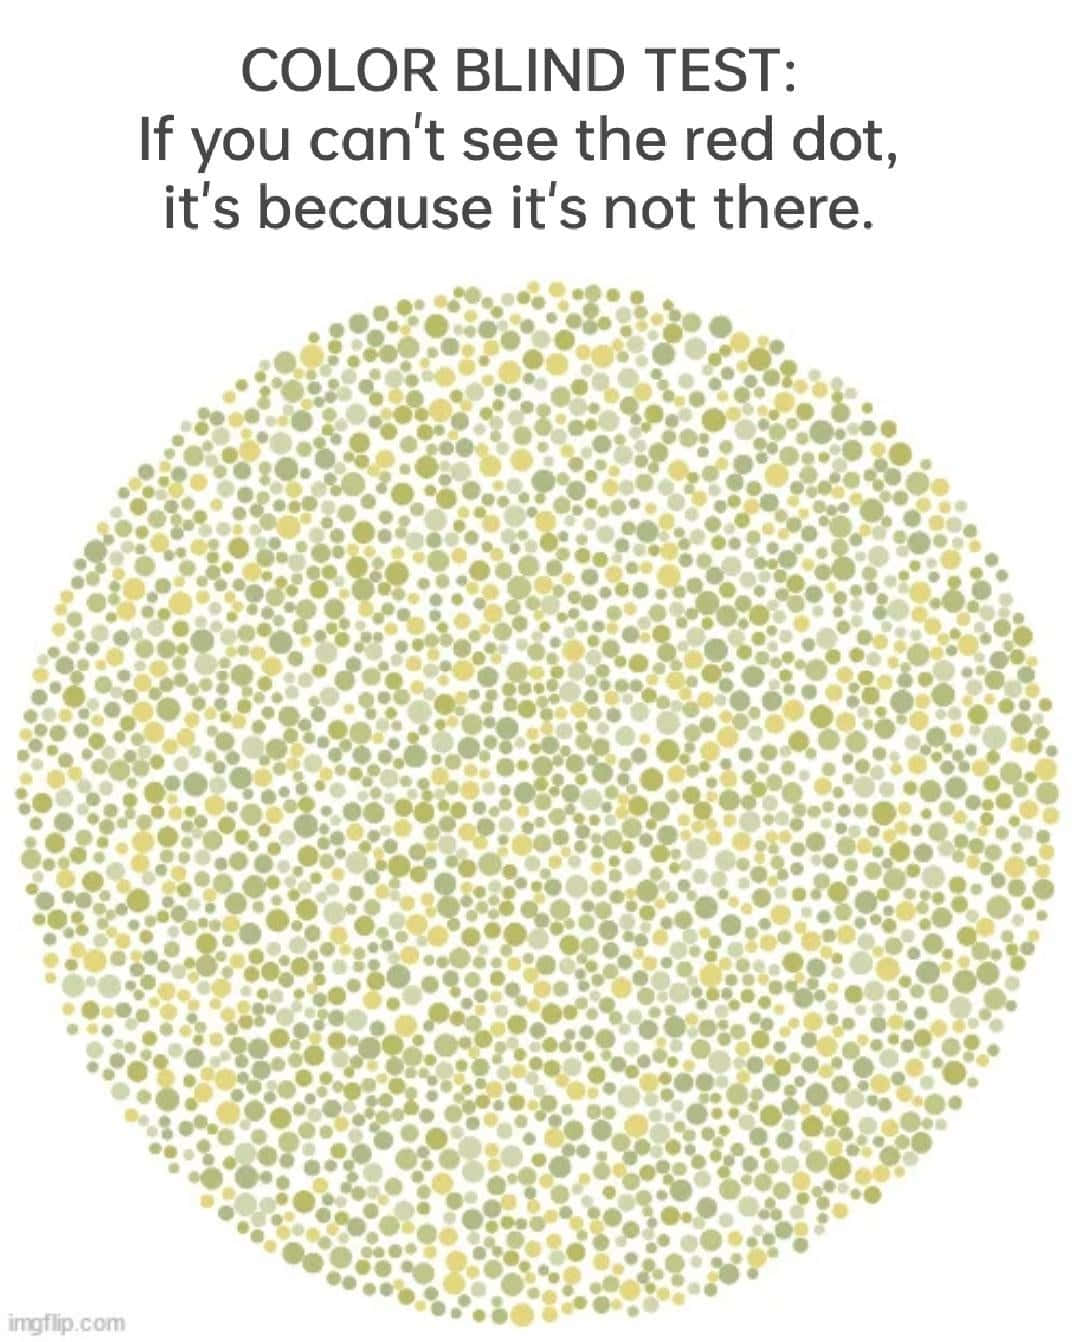 Color Blind Test If You Can't See The Red Dot, Because It's Not There